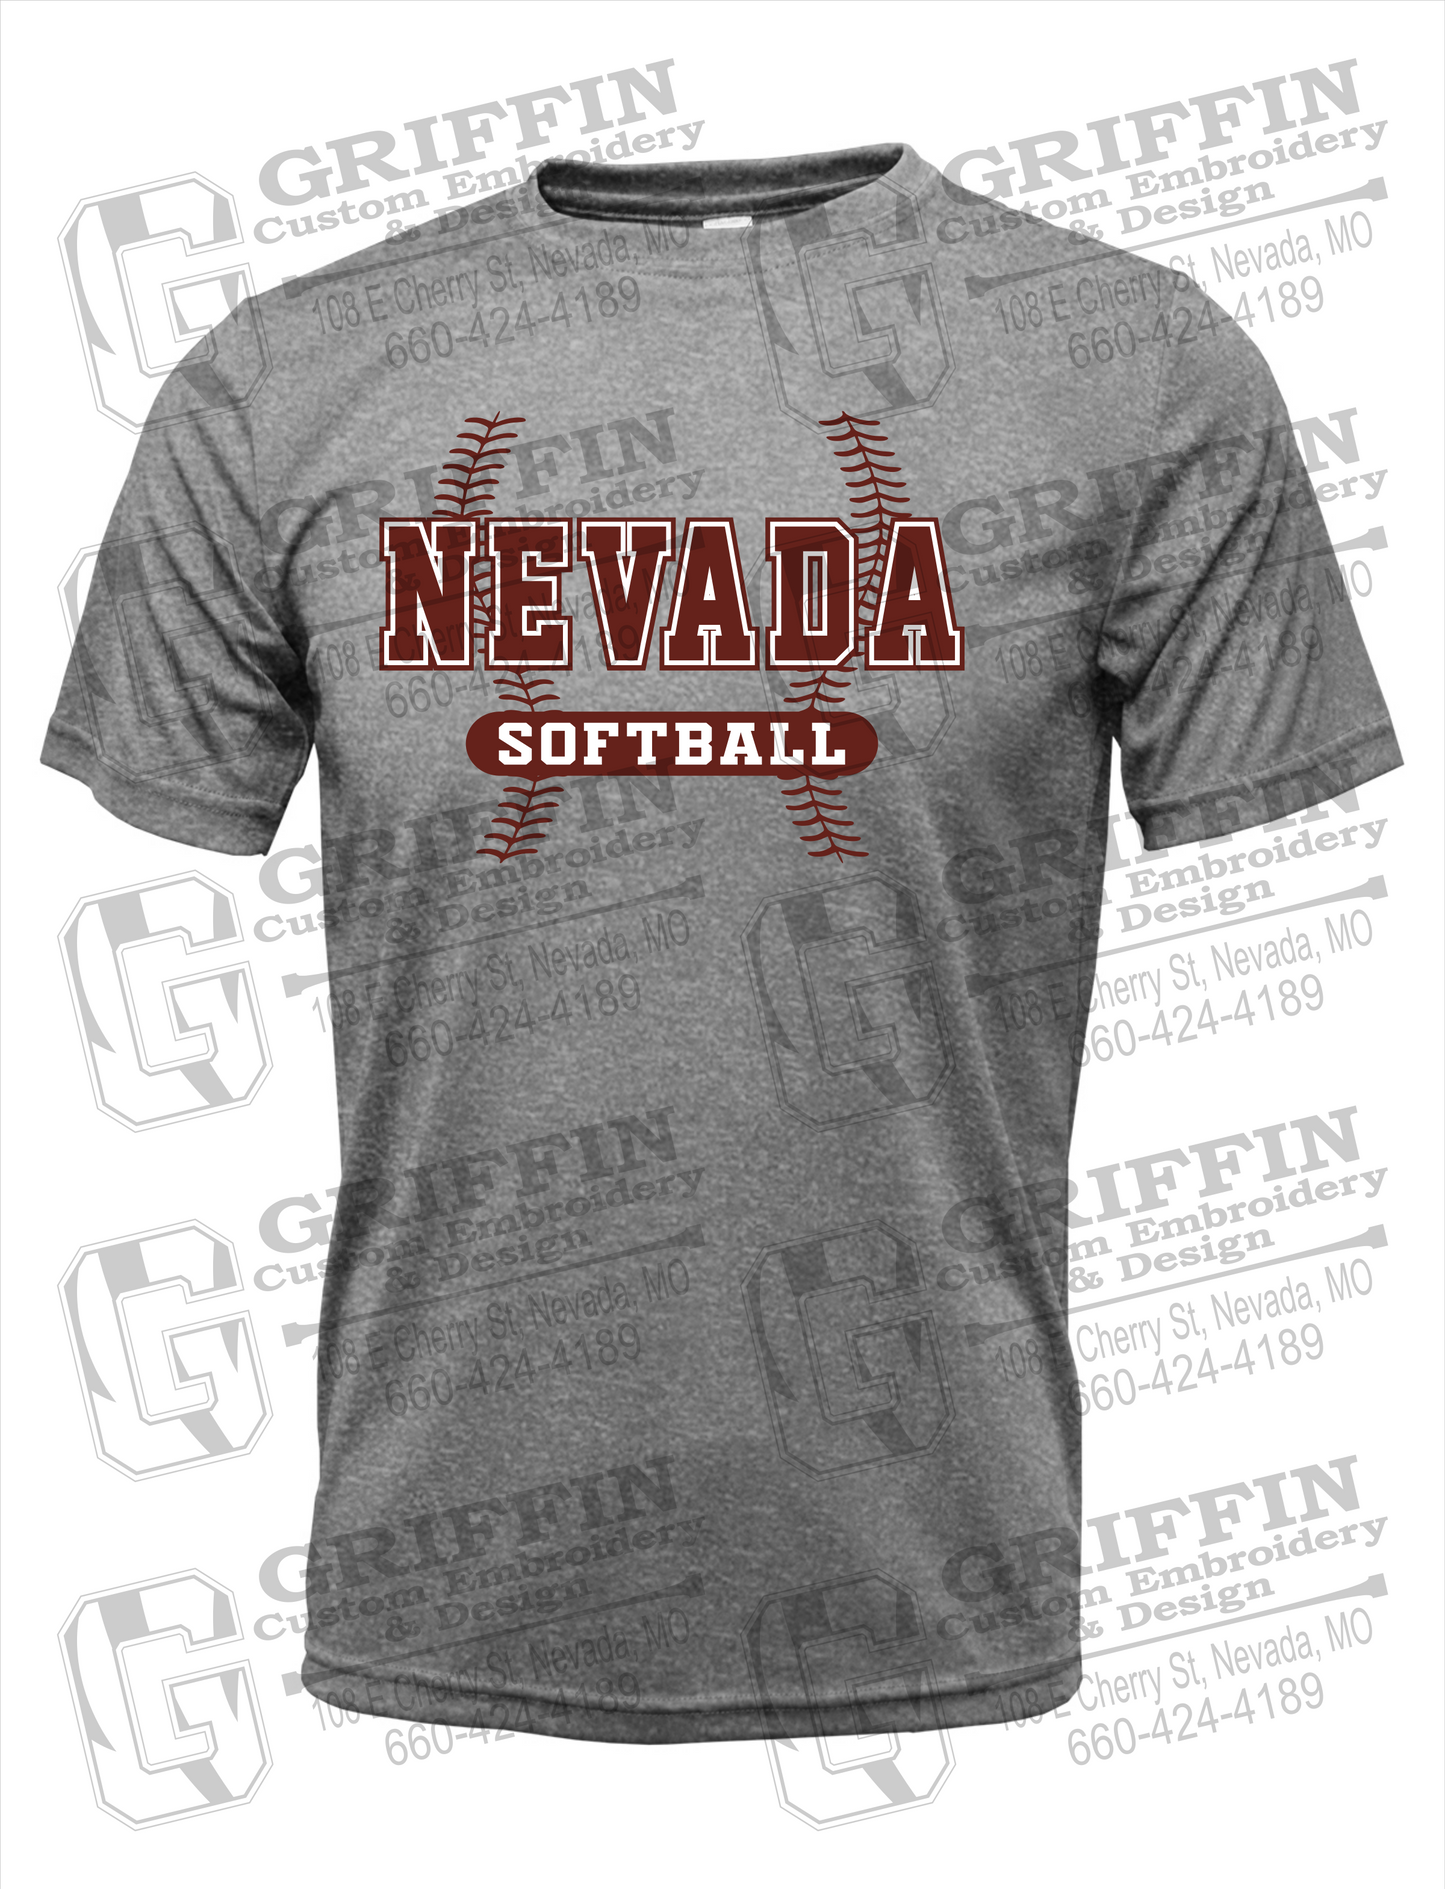 Nevada Tigers 24-E Youth Dry-Fit T-Shirt - Softball